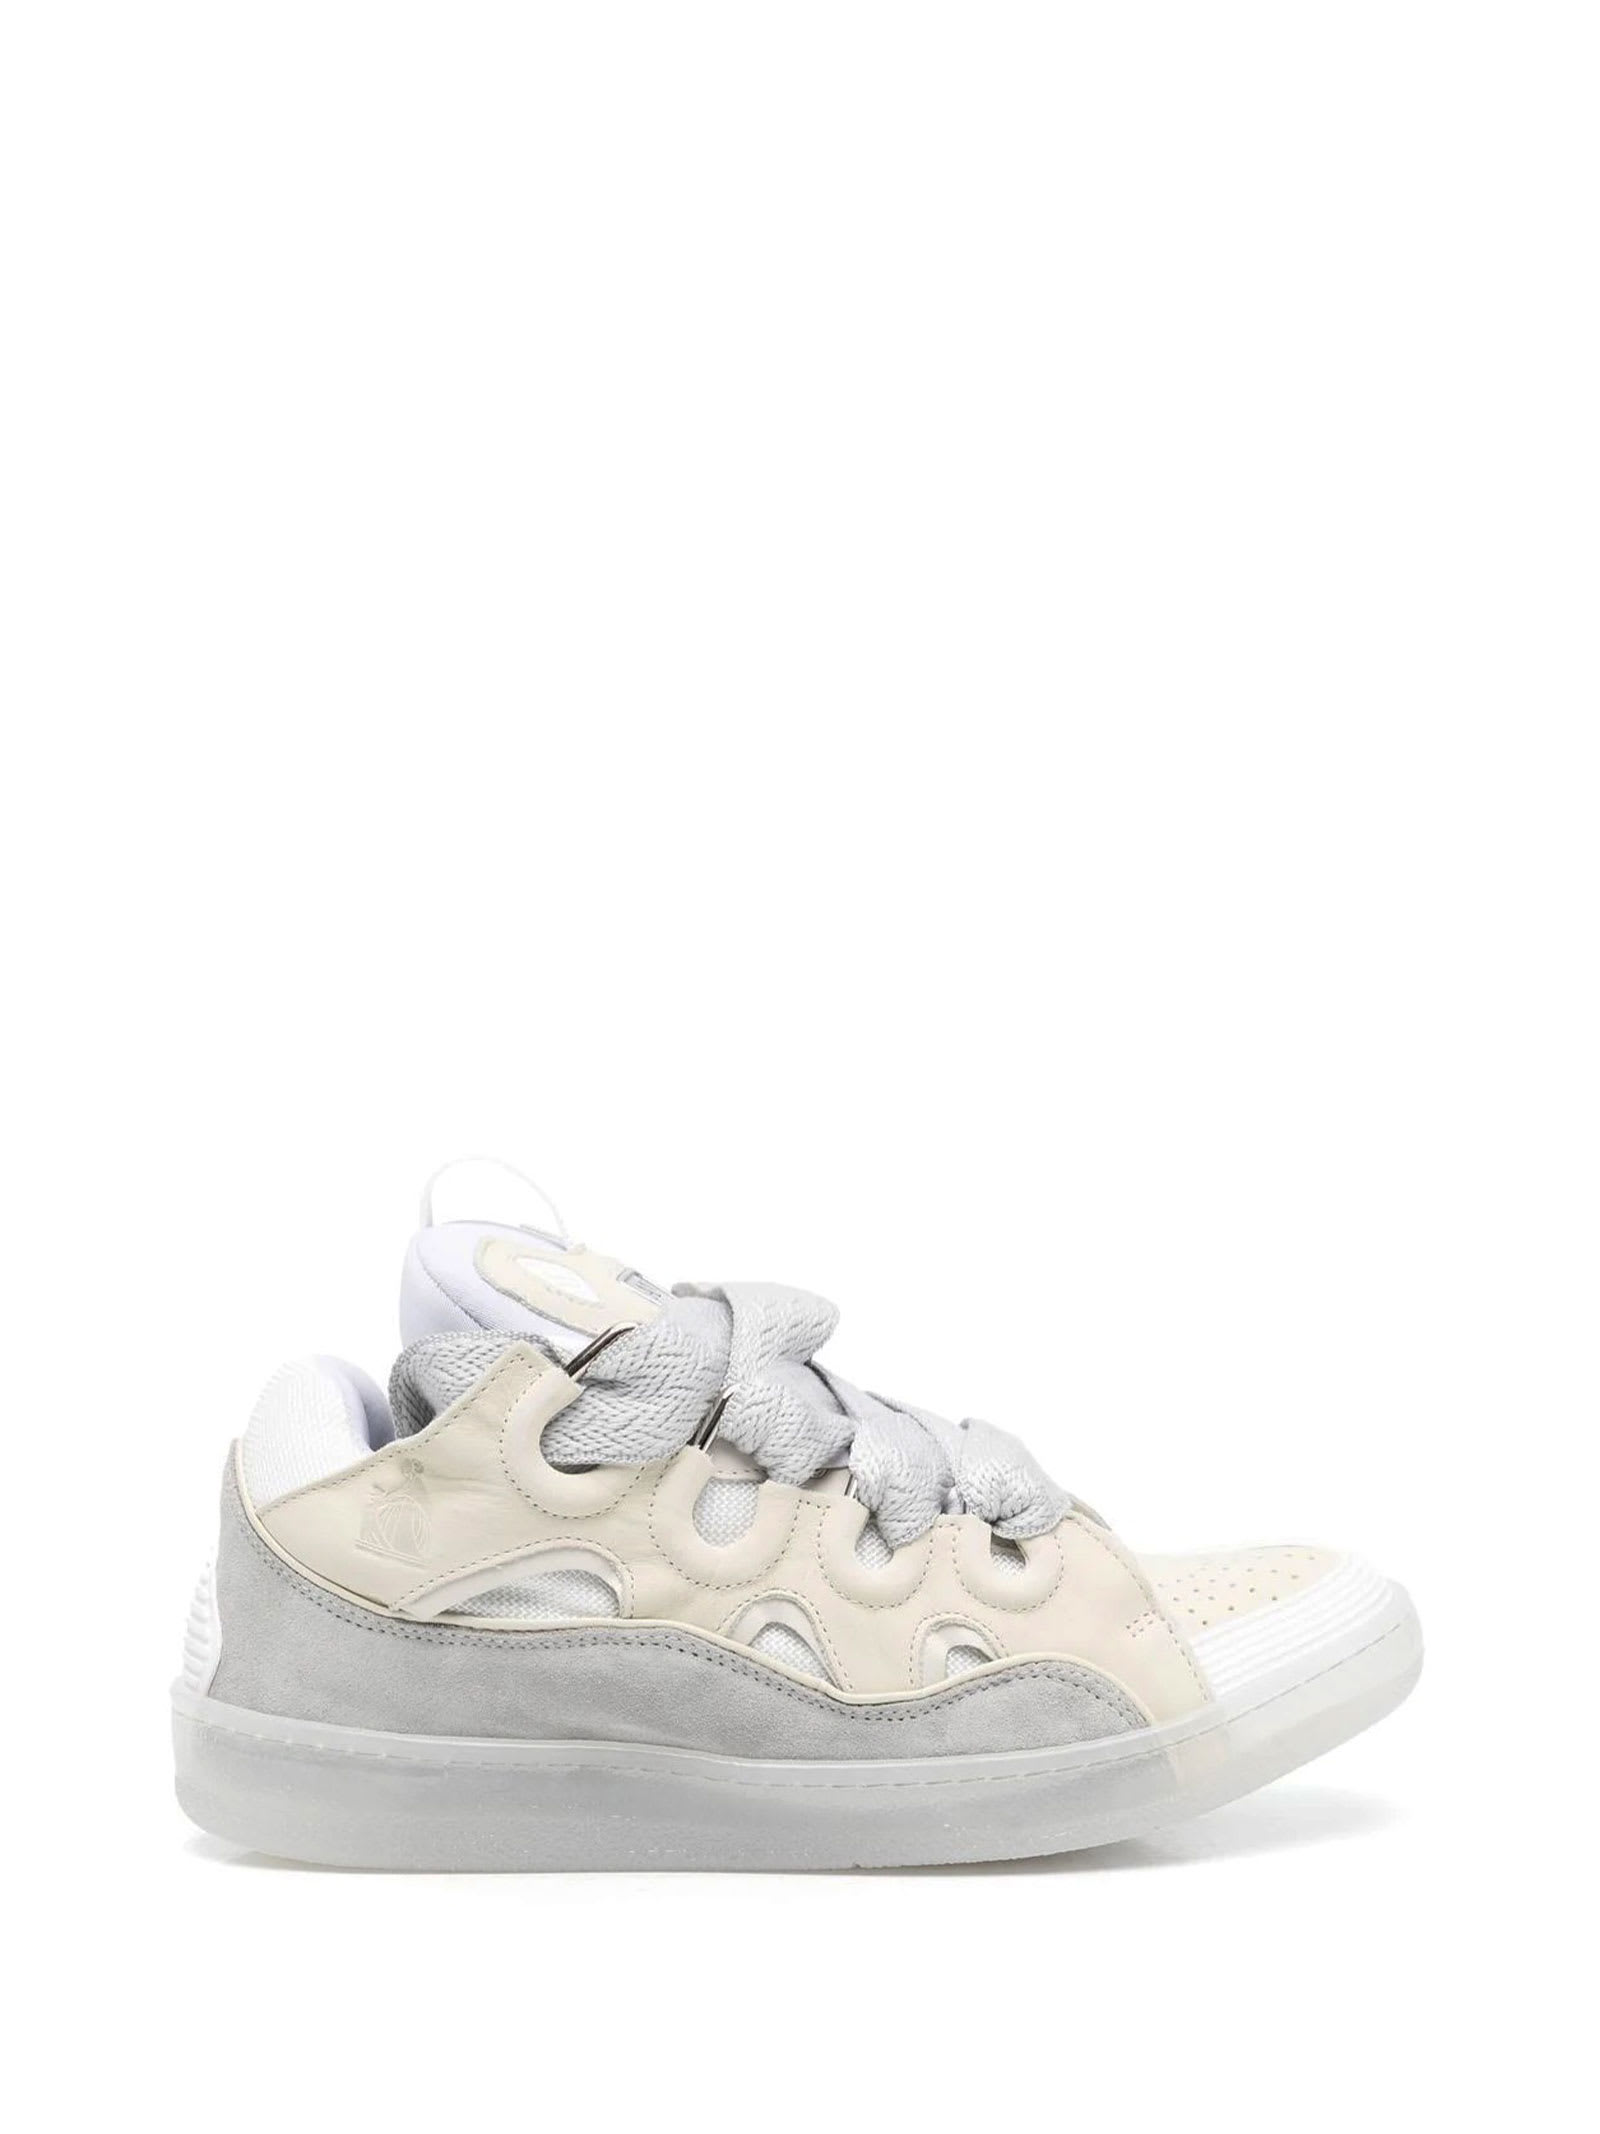 Lanvin Sneakers With Maxi Laces